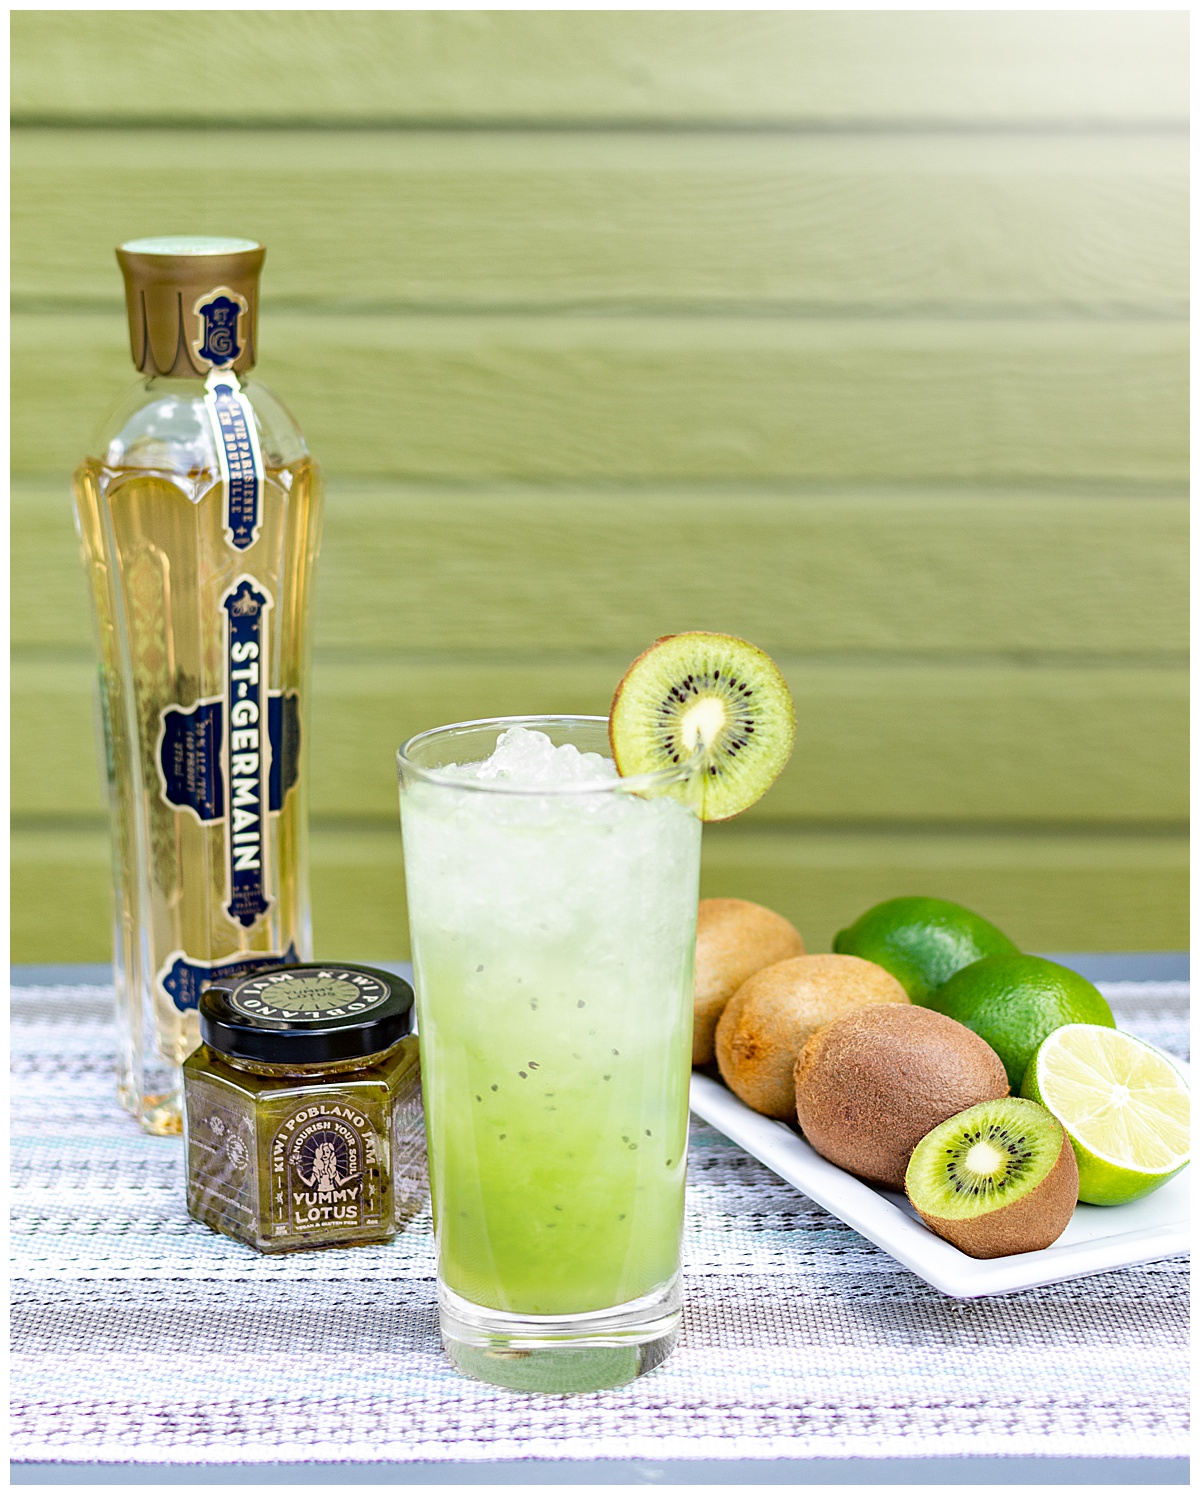 A photo showcasing a Yummy Lotus jam & cocktail pairing. A tall green drink with ice and a kiwi, the Kiwi Poblano jam, a bottle of St Germain liqueur, and a plate of kiwis and limes are on a placemat in front of a green wall.